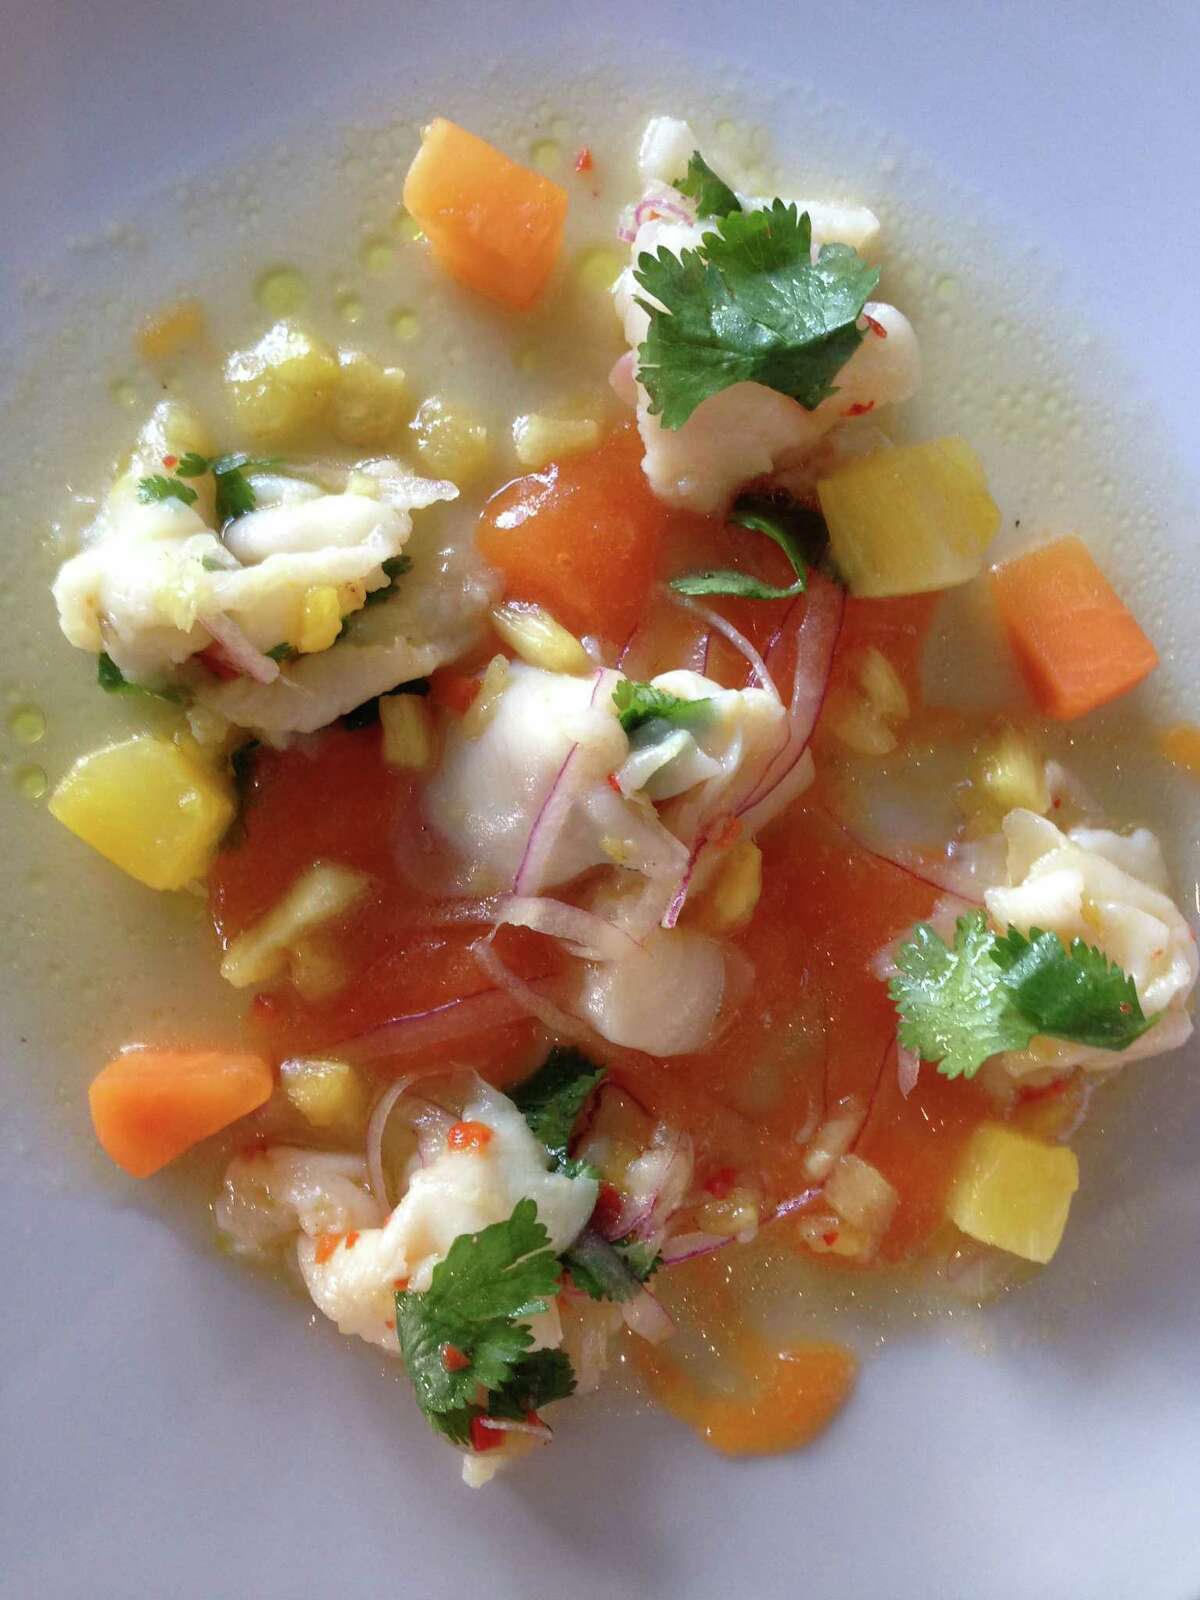 Ceviche de Caracol (conch with pineapple, ginger and red jalapeno) at Caracol, Houston.